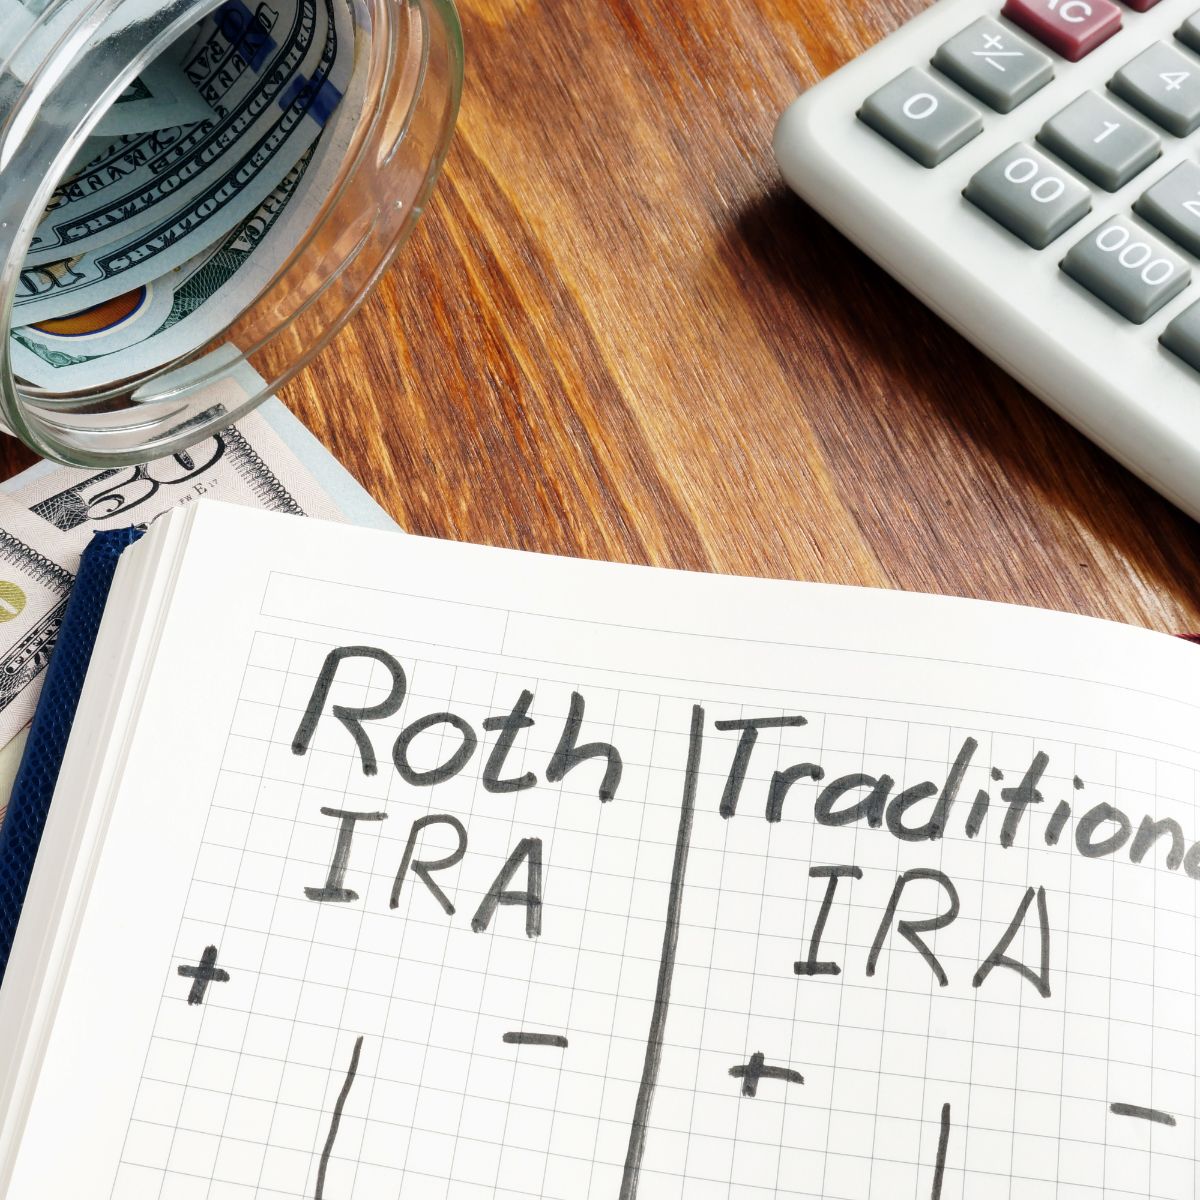 Differences Between Roth and Traditional IRAs